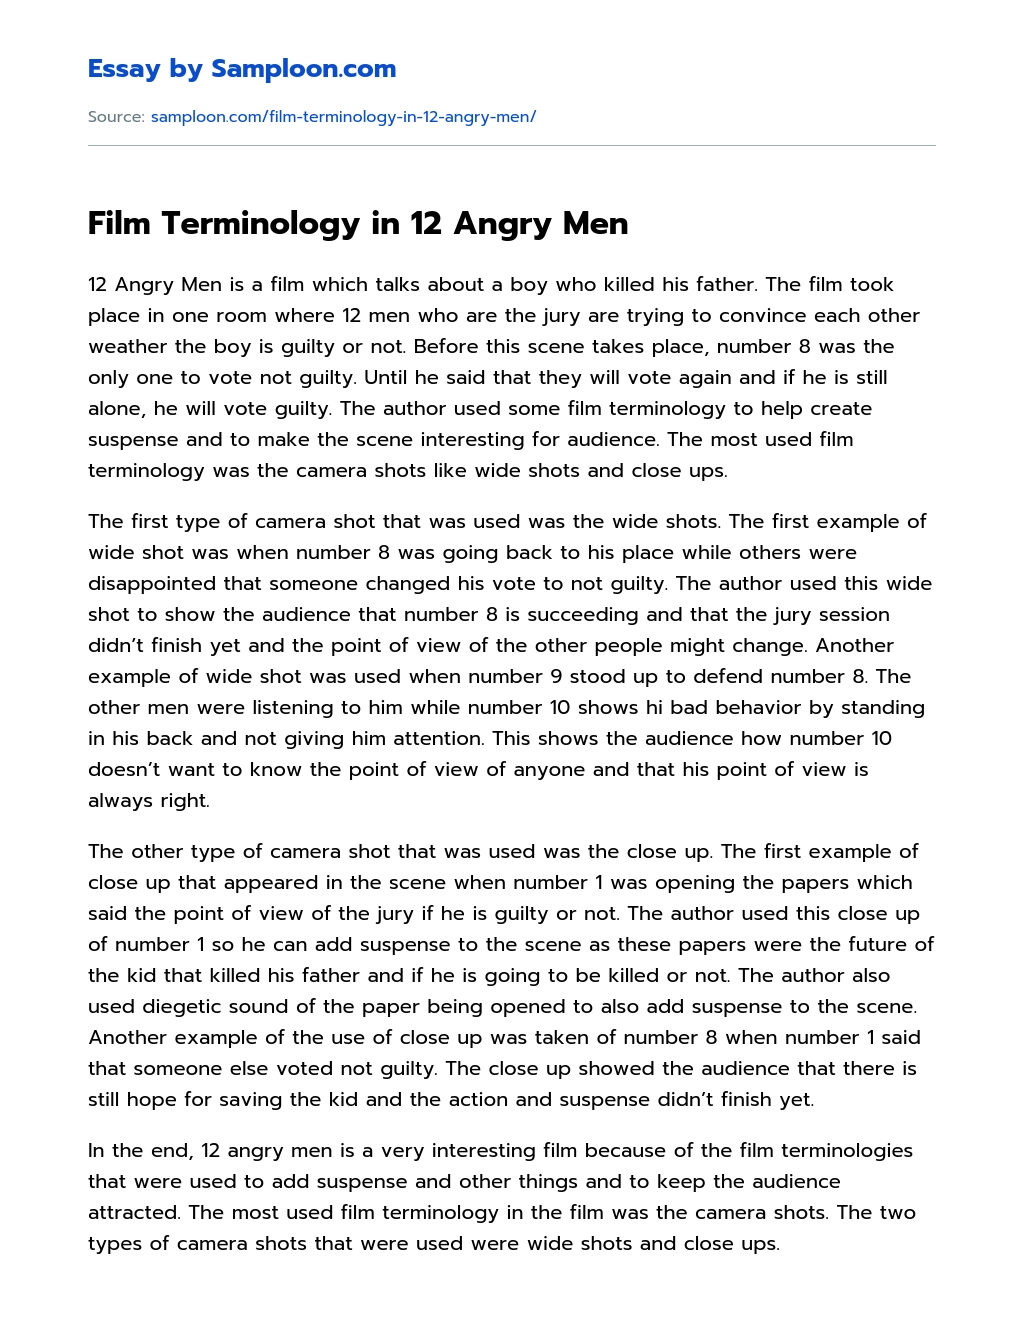 Film Terminology in 12 Angry Men essay